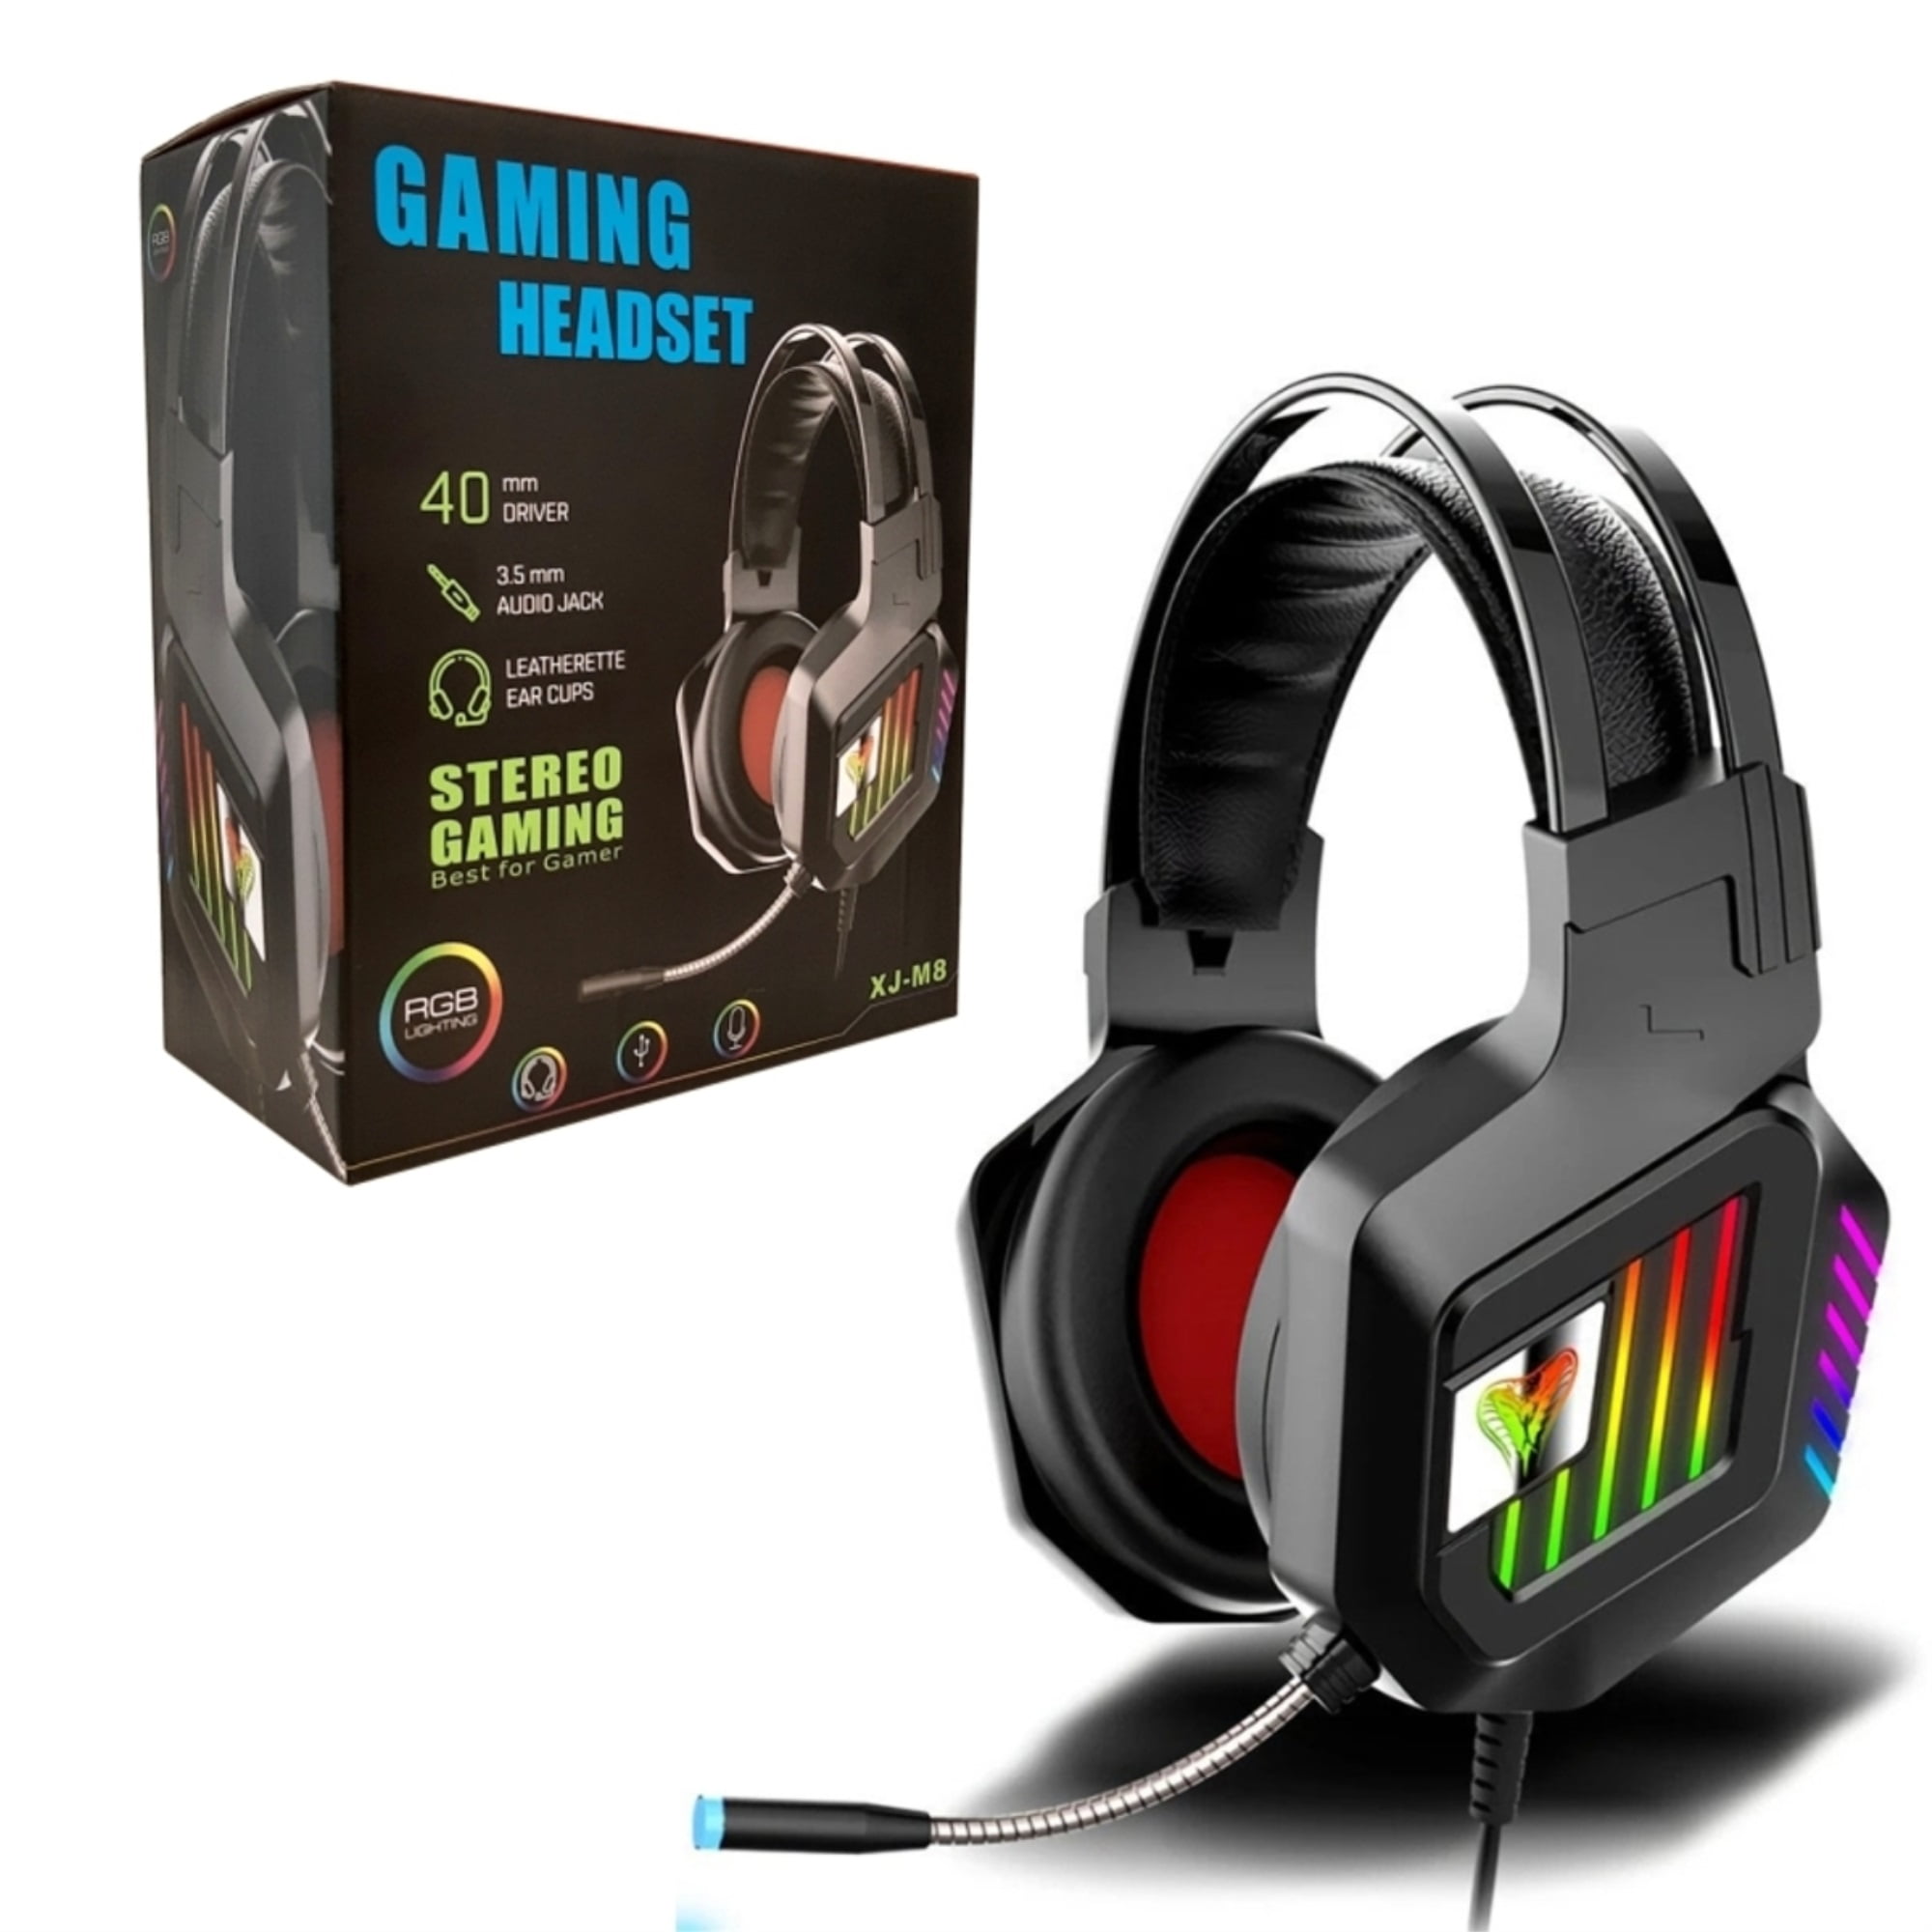 rekken Adverteerder Advertentie Universal Rgb Light Gaming Headset Ps4 Headset, Xbox One Headset With Noise  Canceling Mic Pc Headset With Stereo Surround Sound - Walmart.com